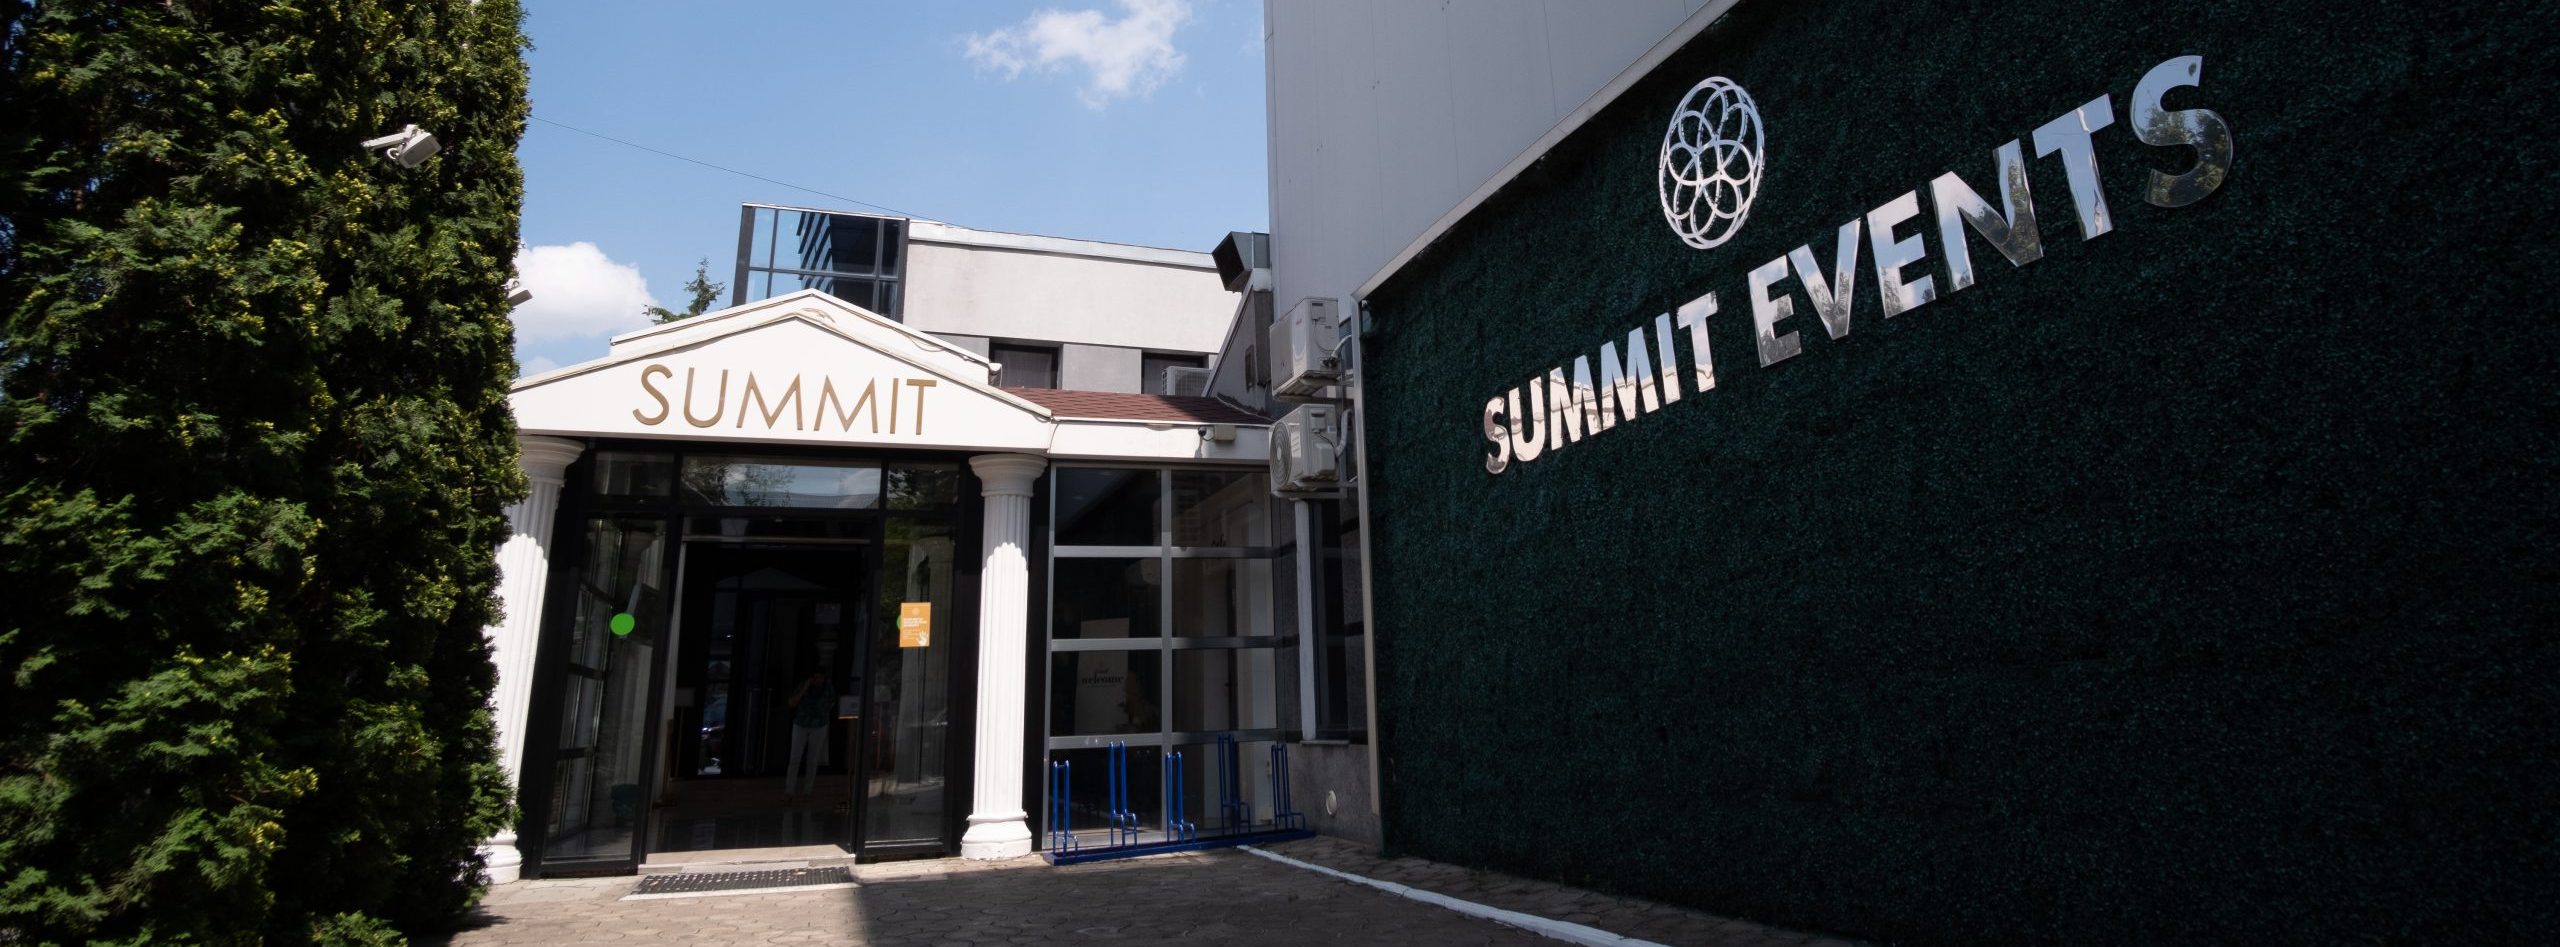 Summit Events Entrance